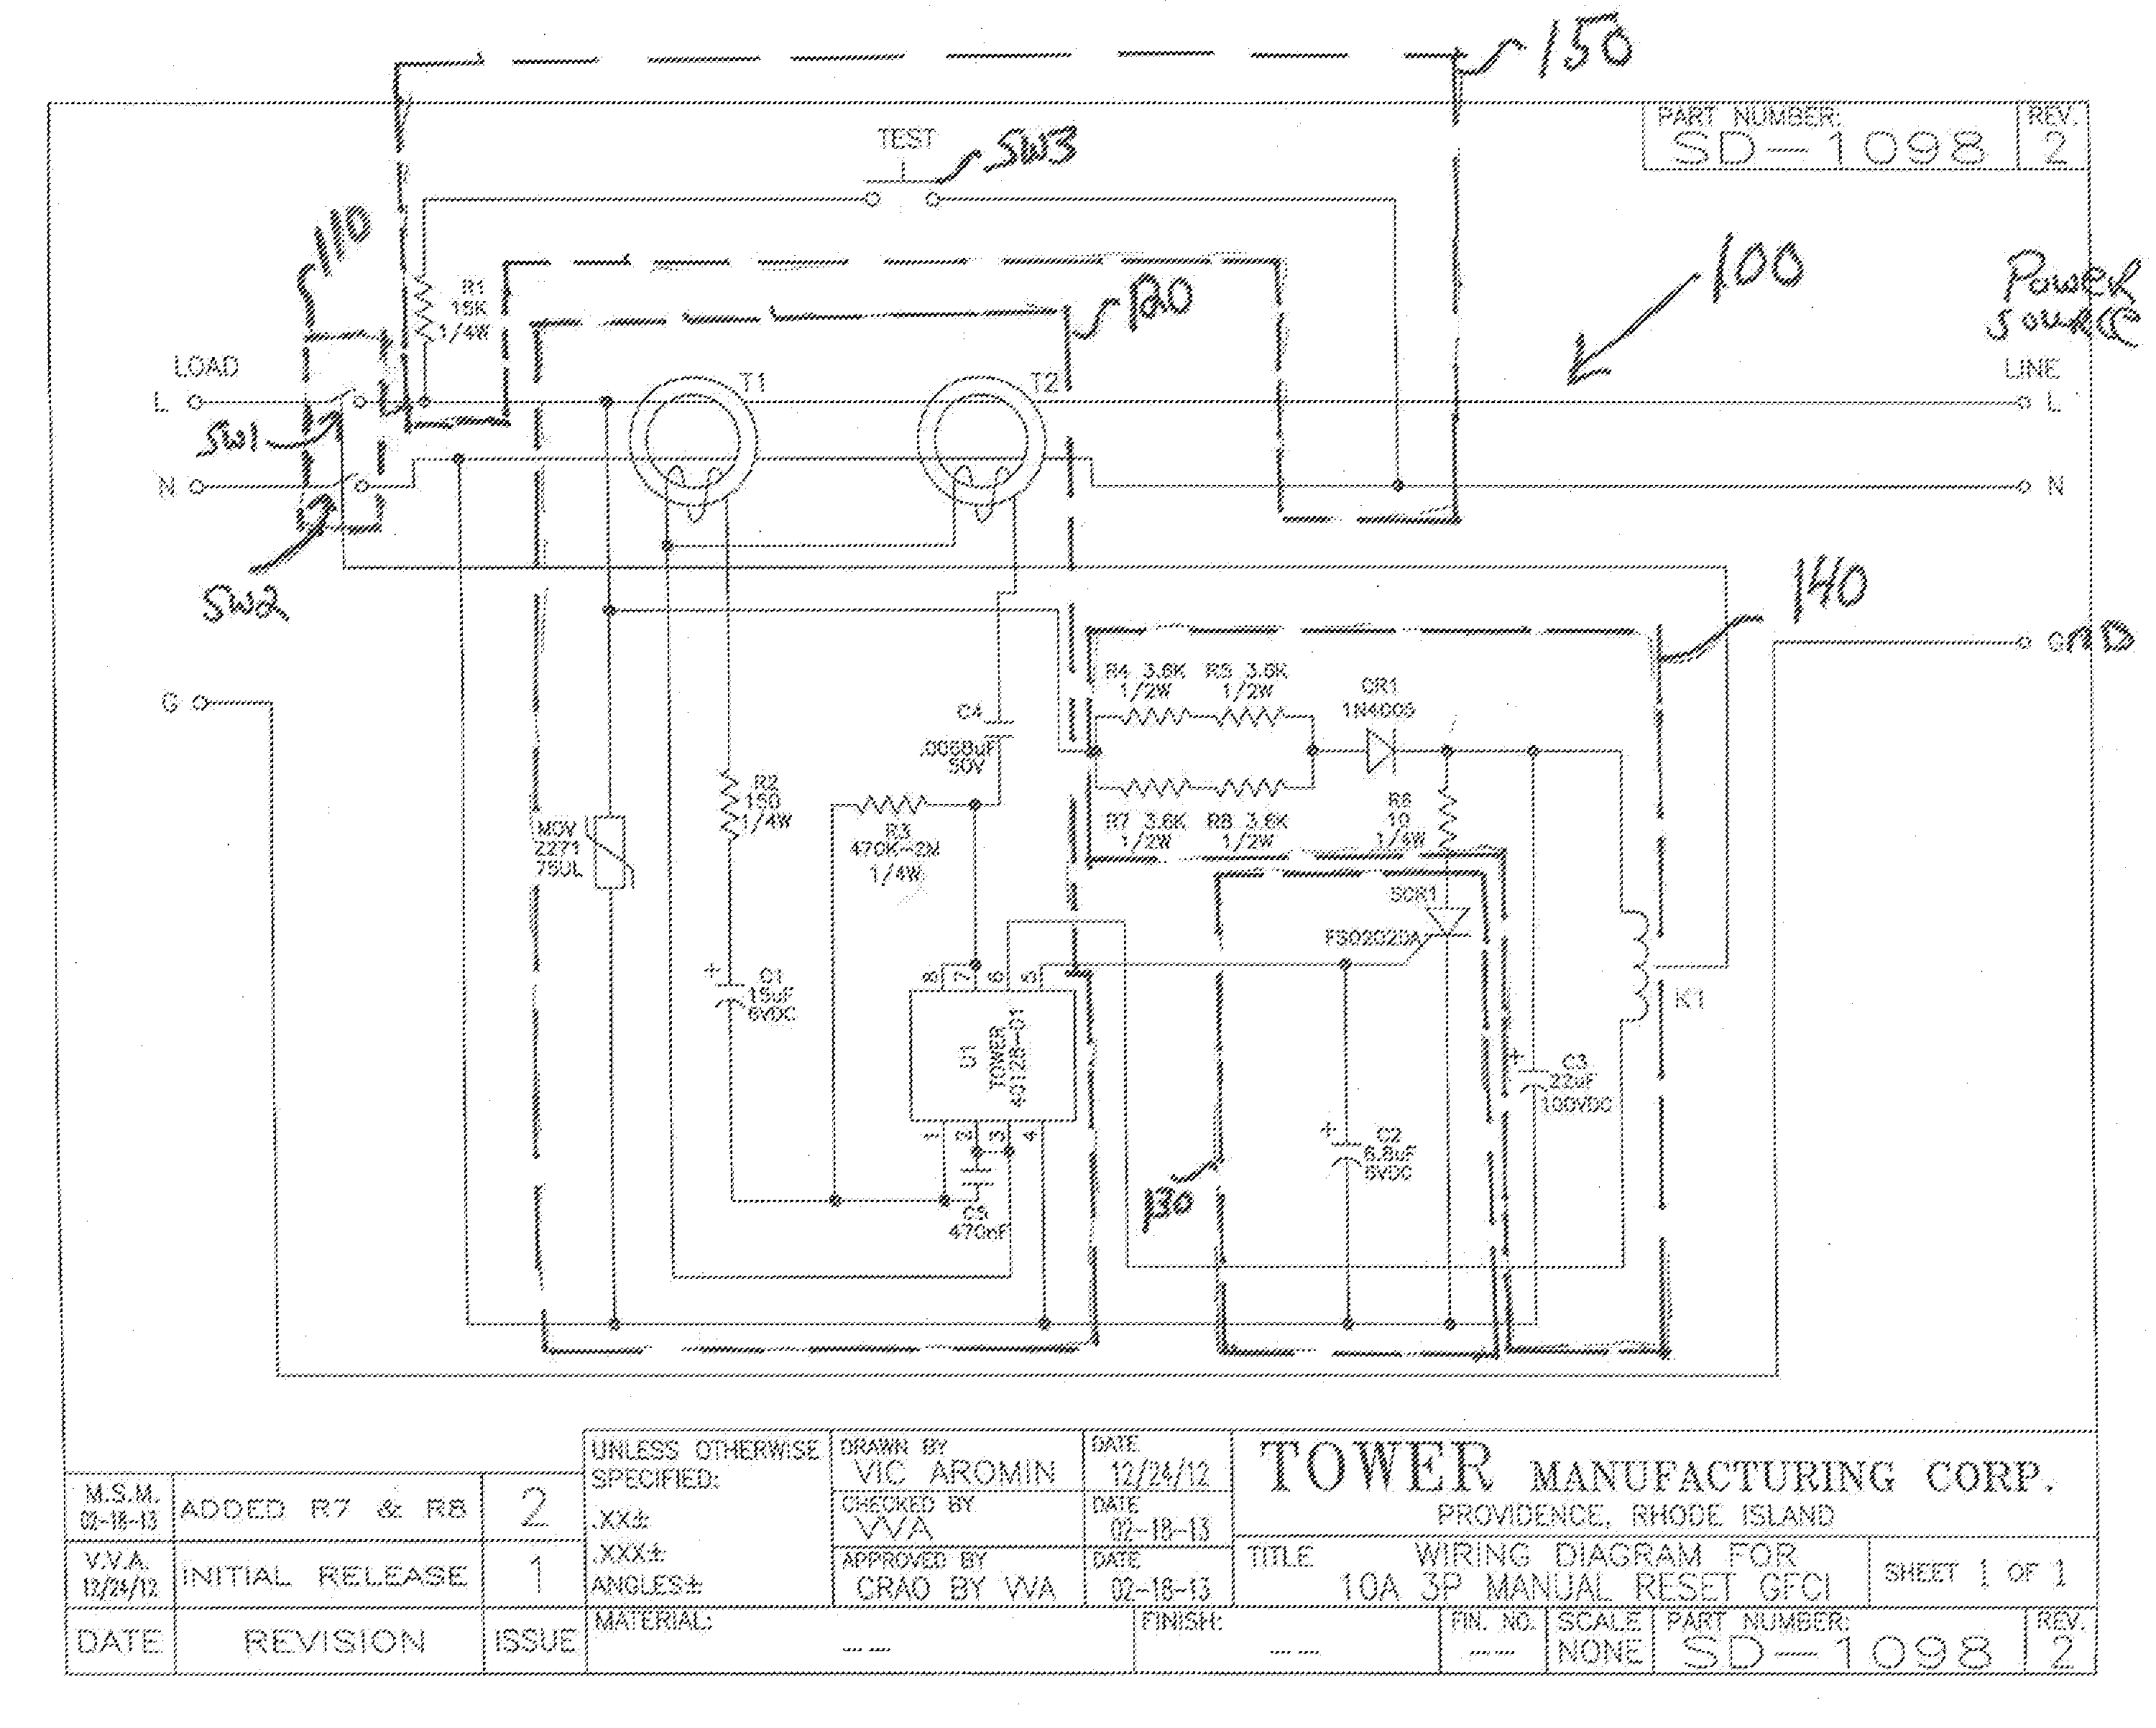 Manual reset ground fault circuit interruptor (GFCI) with a quick connect load input